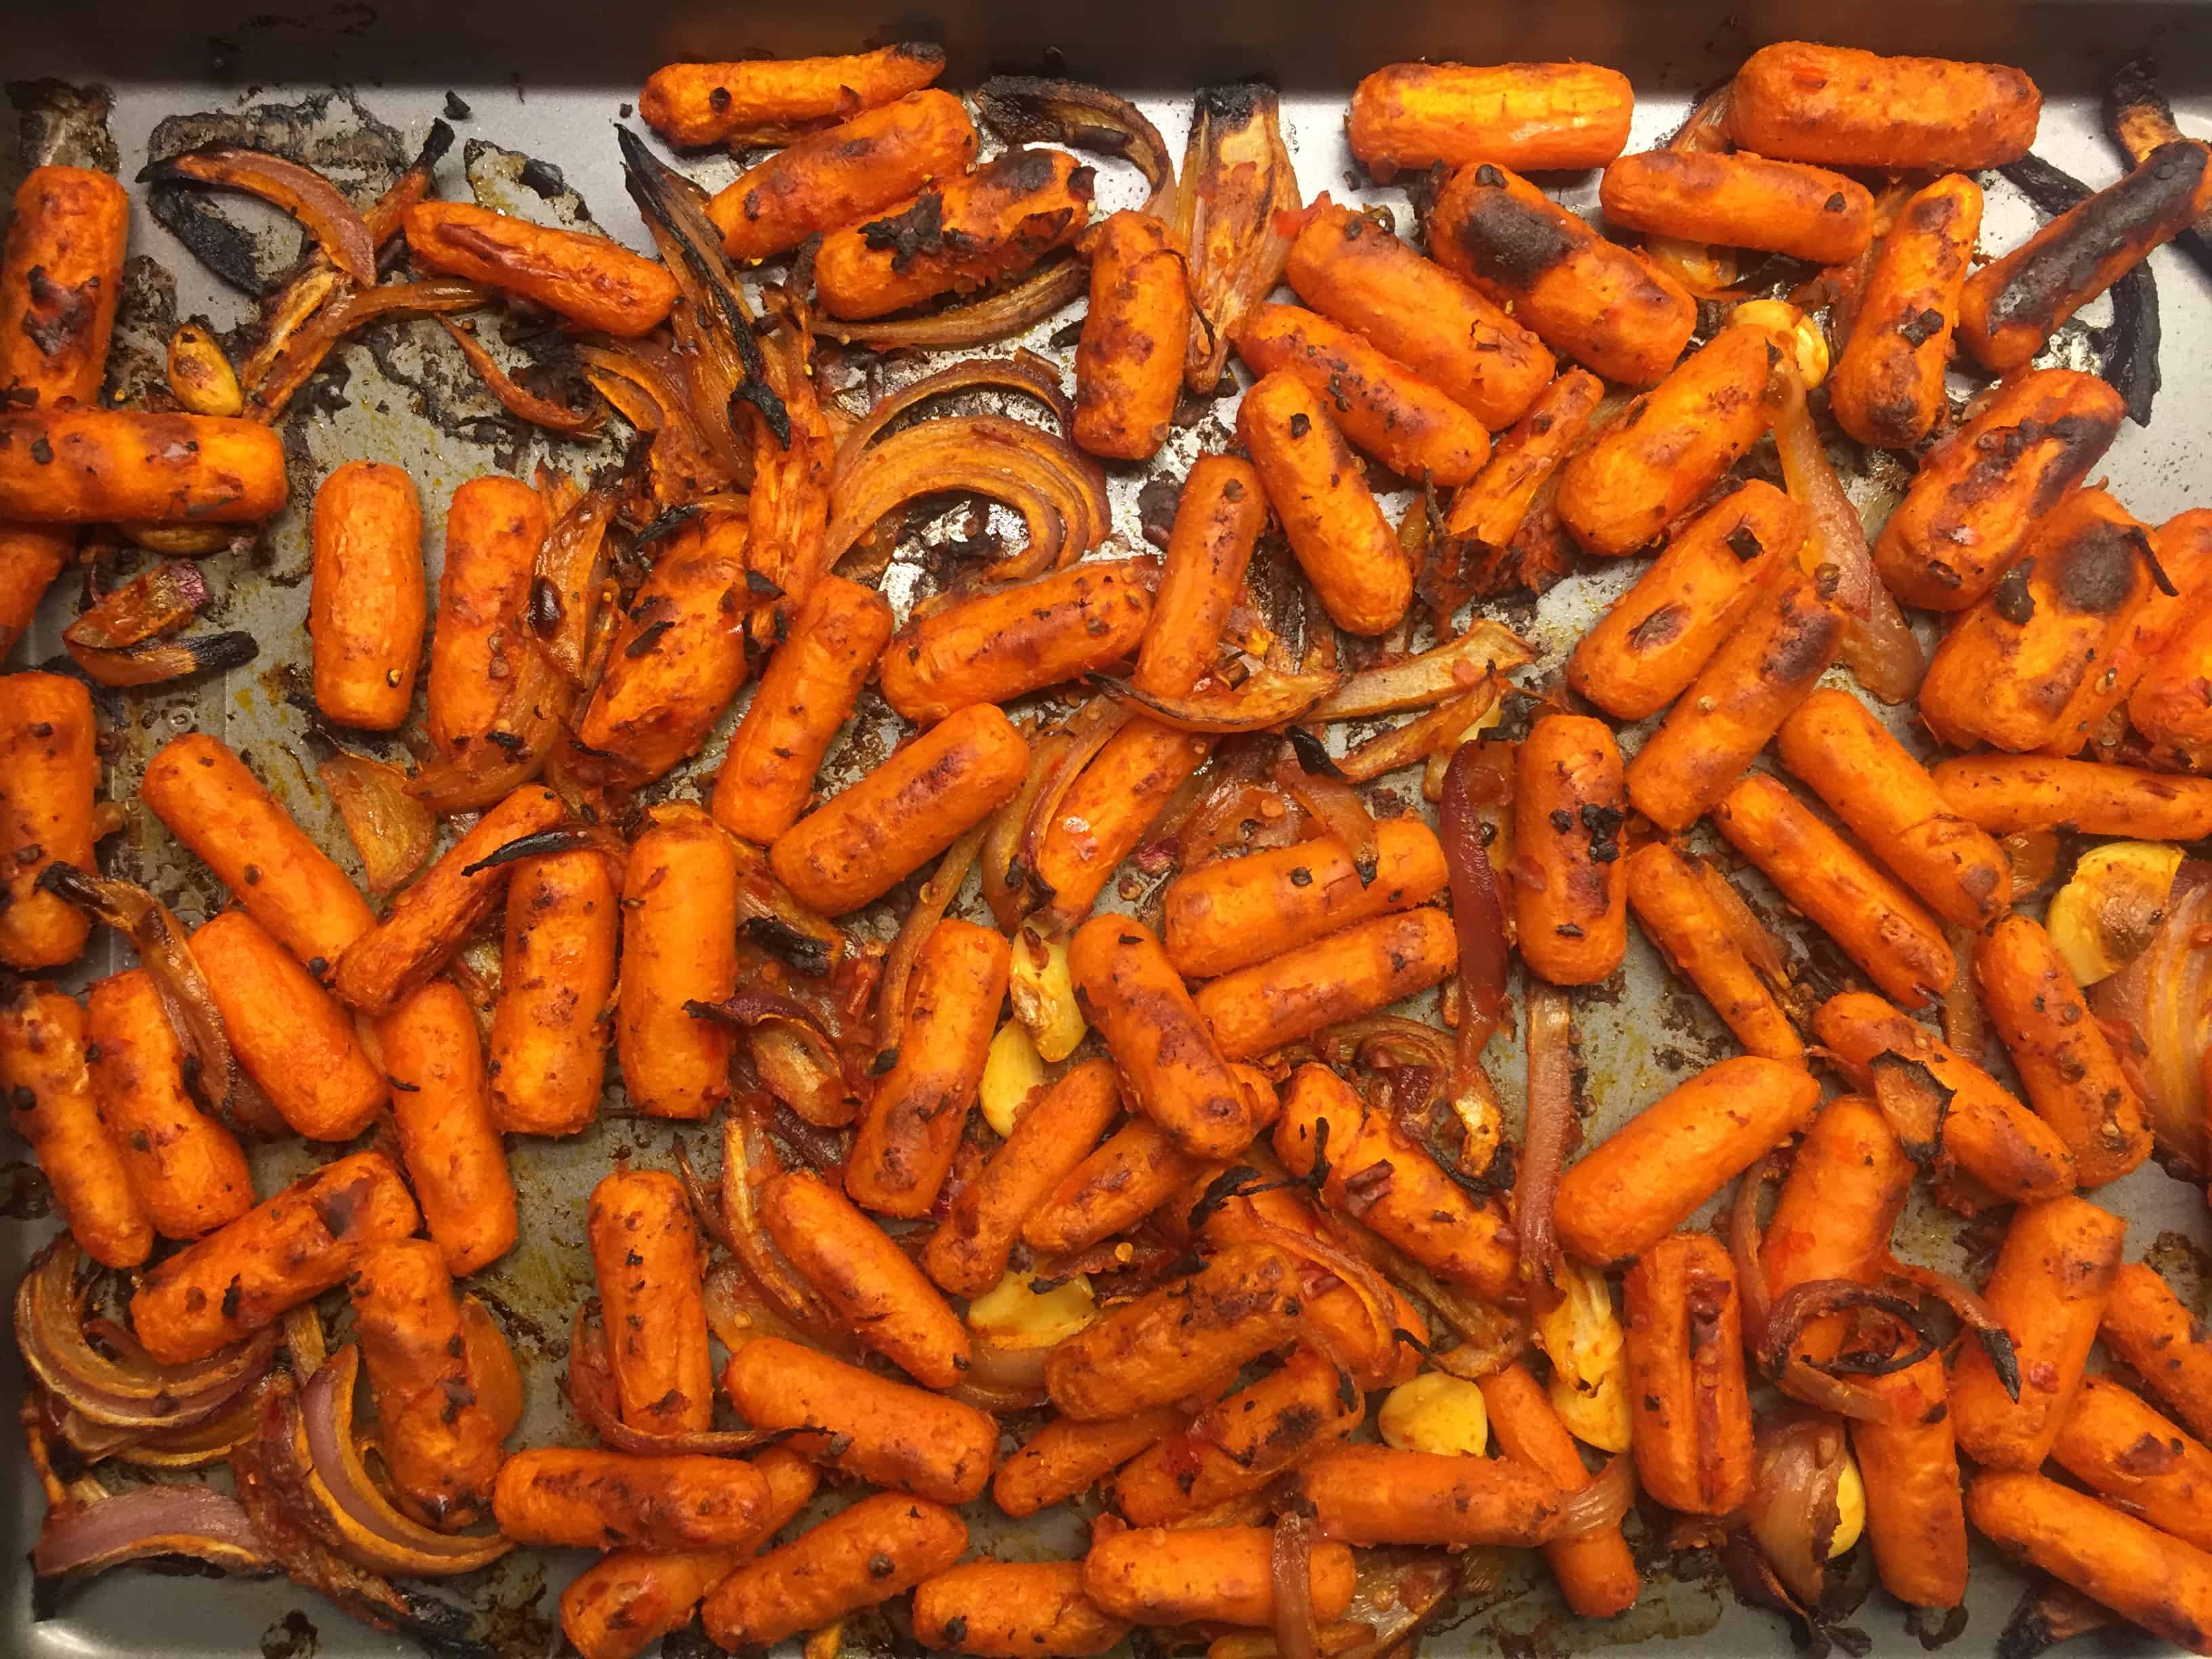 Harissa Roasted Carrot Salad starts with roasting carrots and onions